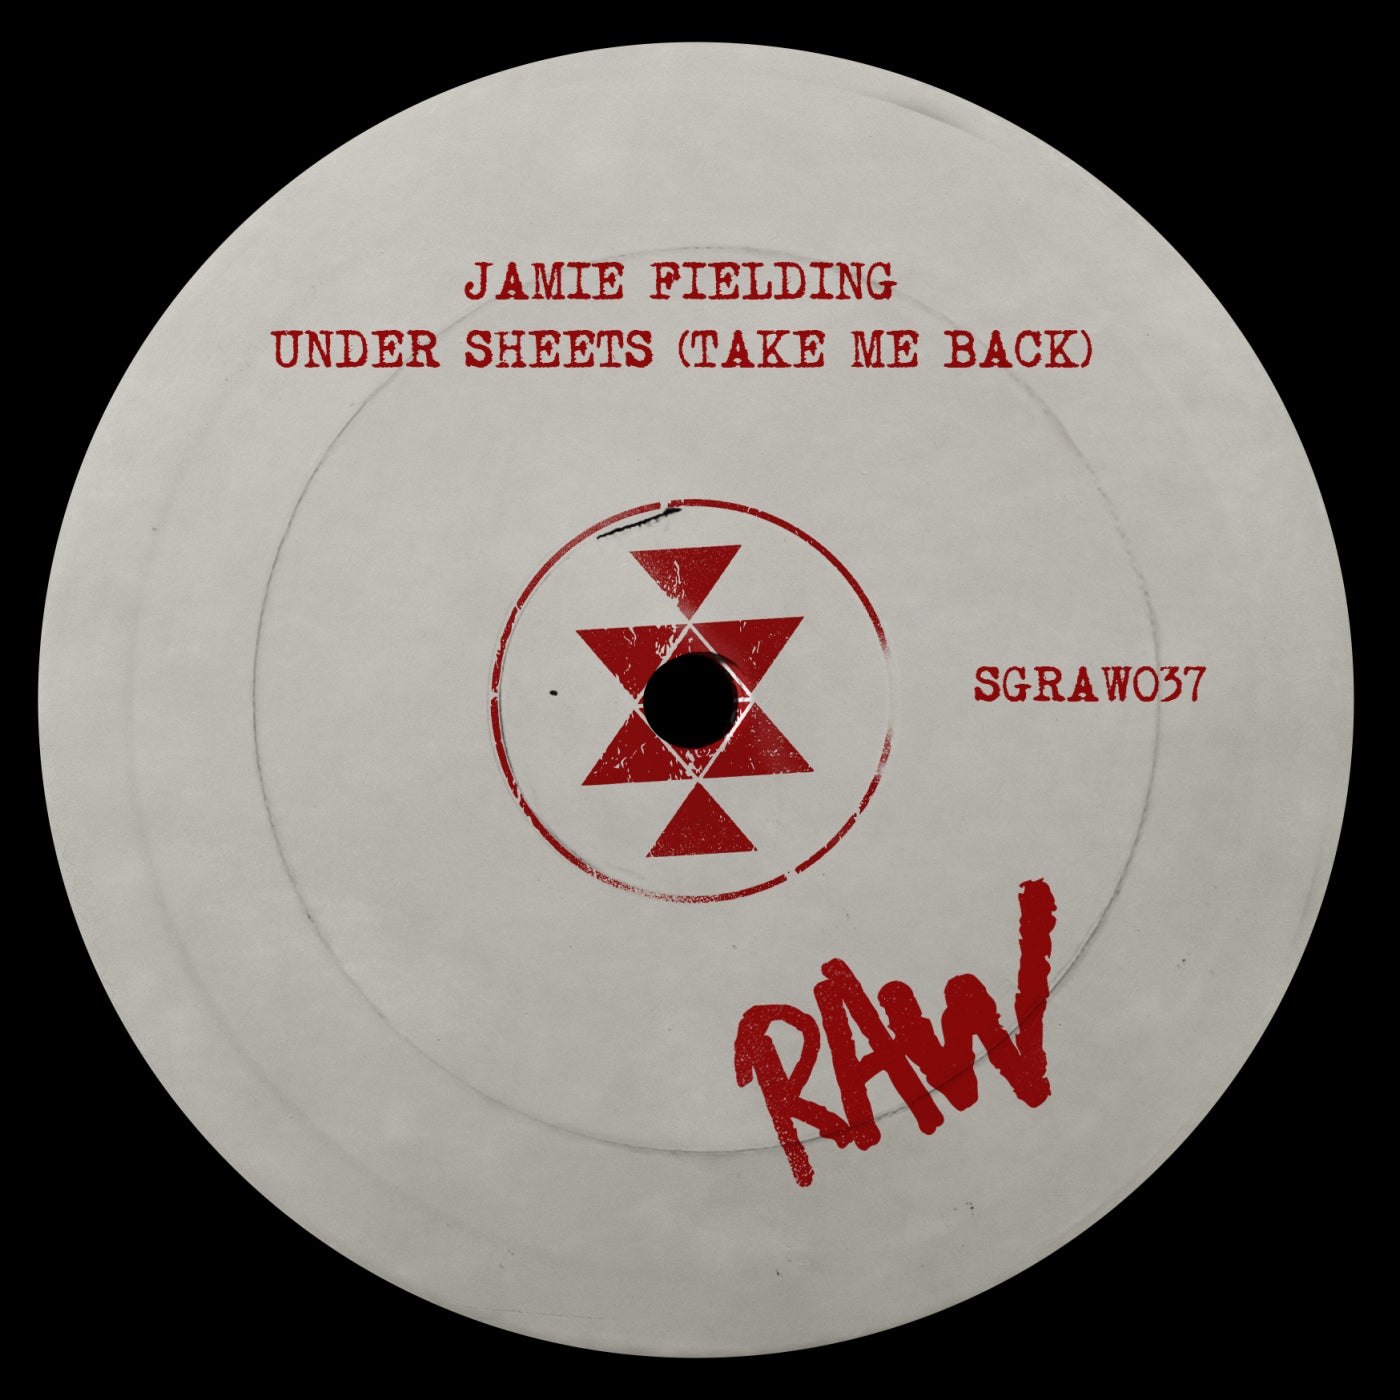 Jamie Fielding – Under Sheets (Take Me Back) [SGRAW037]